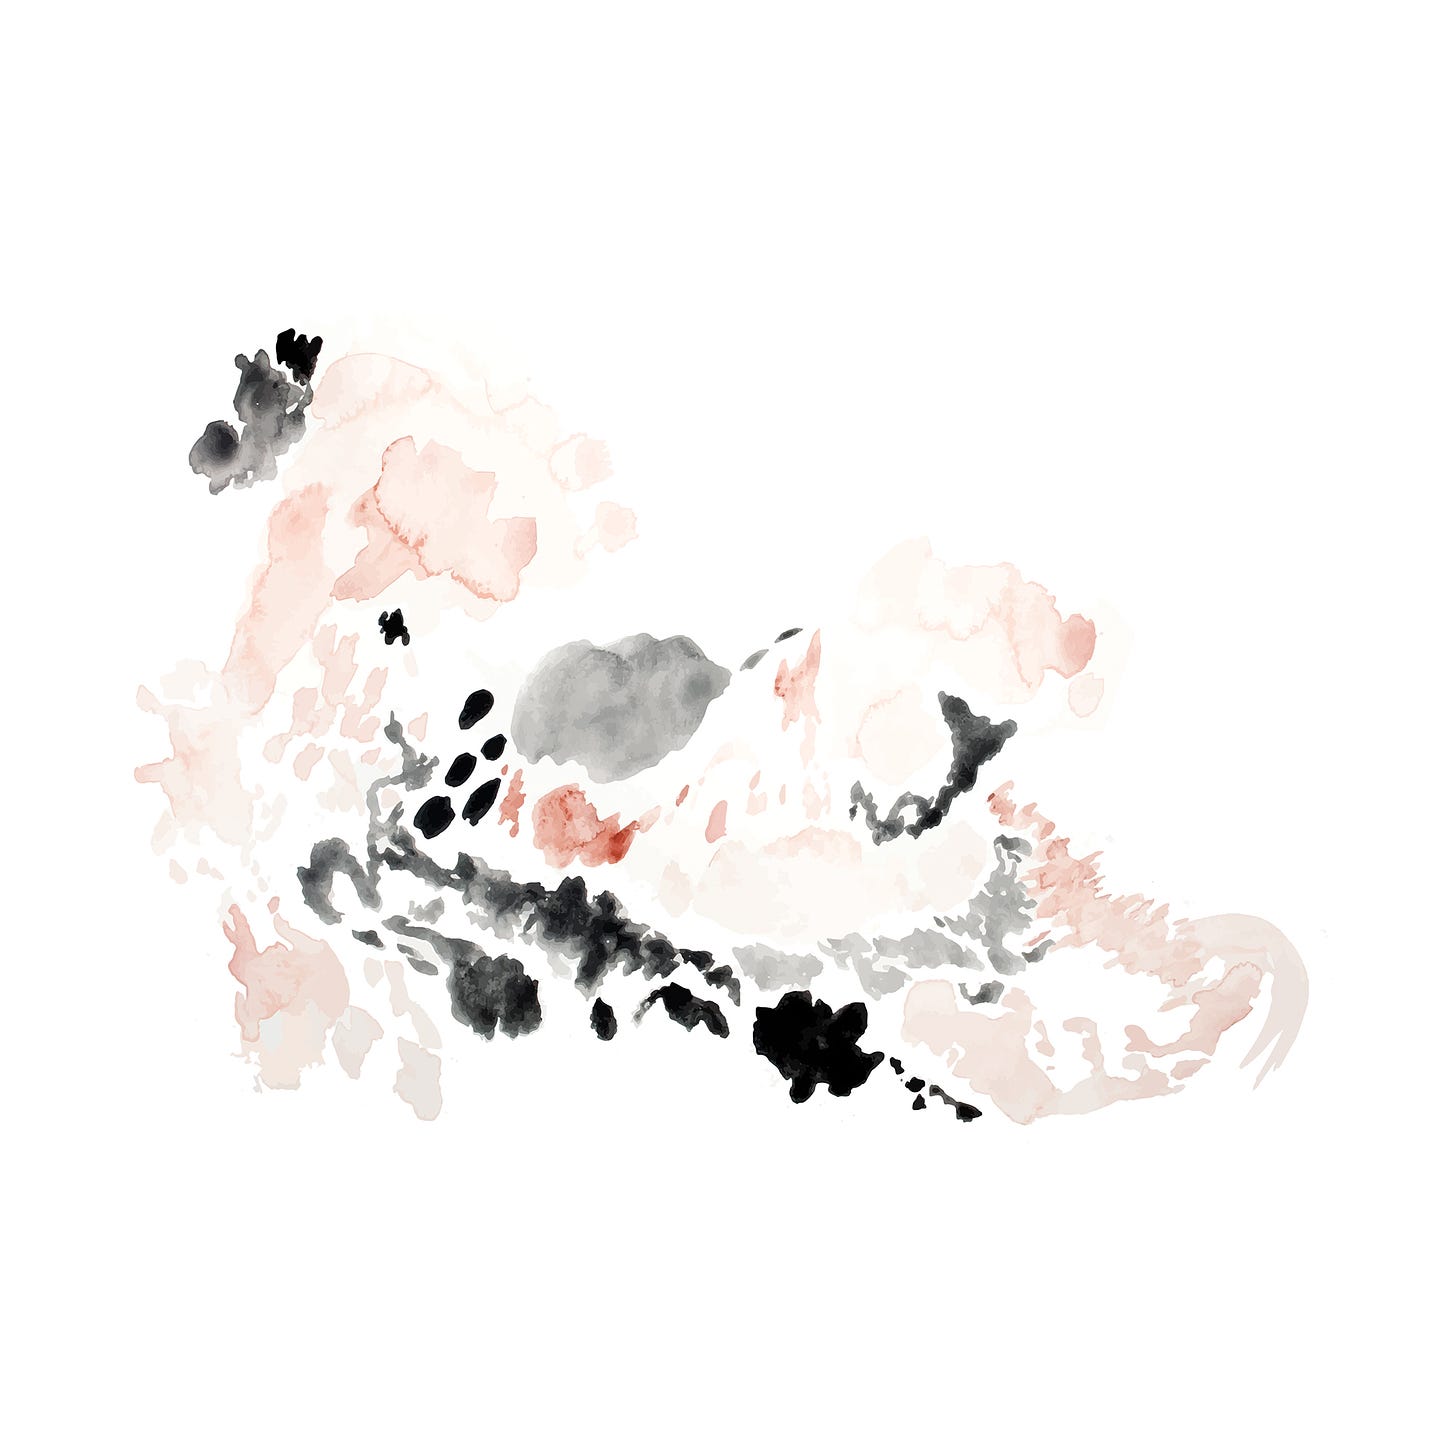 Image of abstract watercolor with soft colors and black